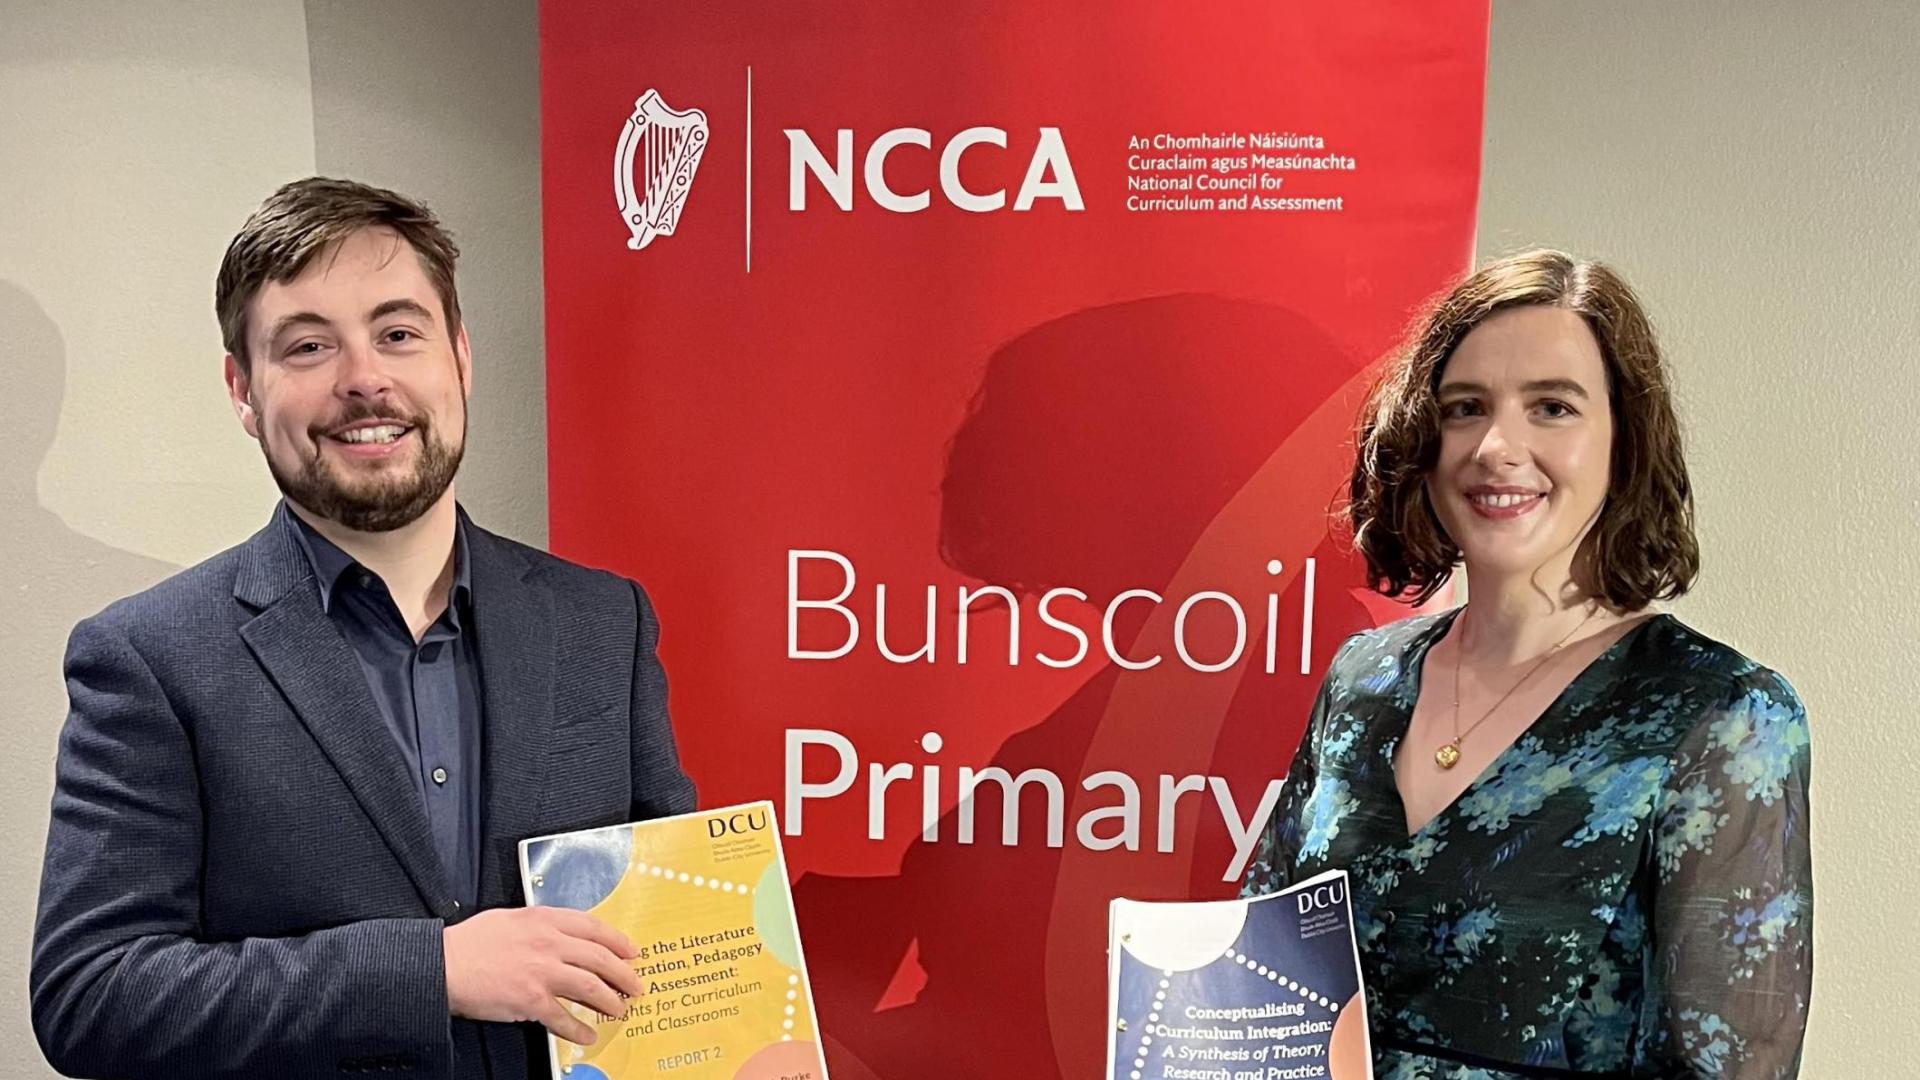 Dr Patrick Burke and Dr Paula Lehane at the NCCA event